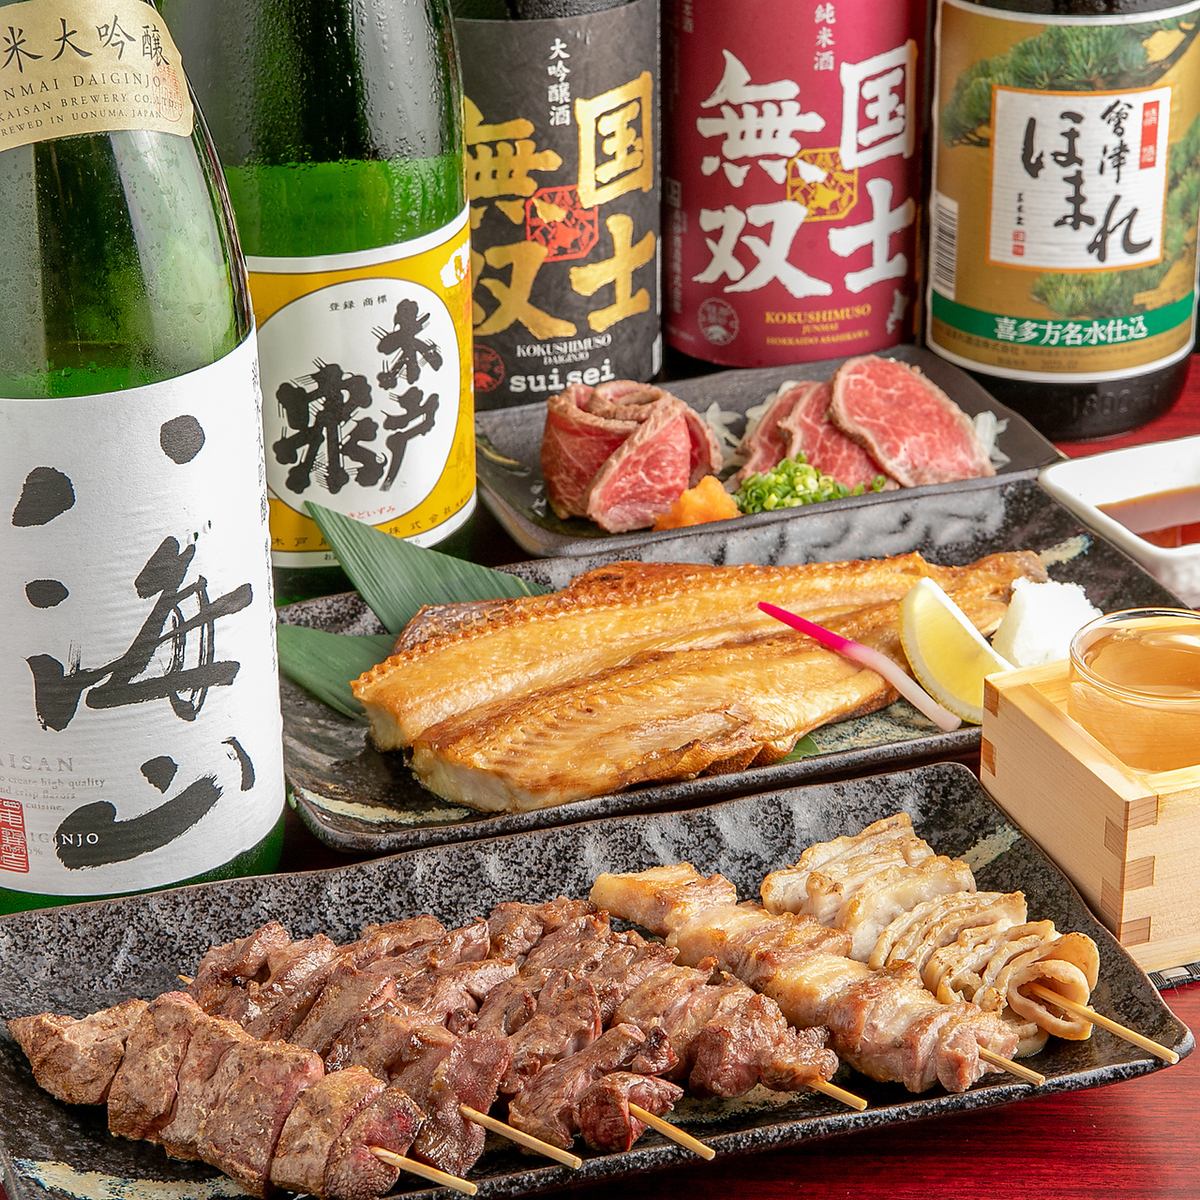 A 1-minute walk from Nishikasai Station! Don't miss the sashimi and sake delivered directly from the market!